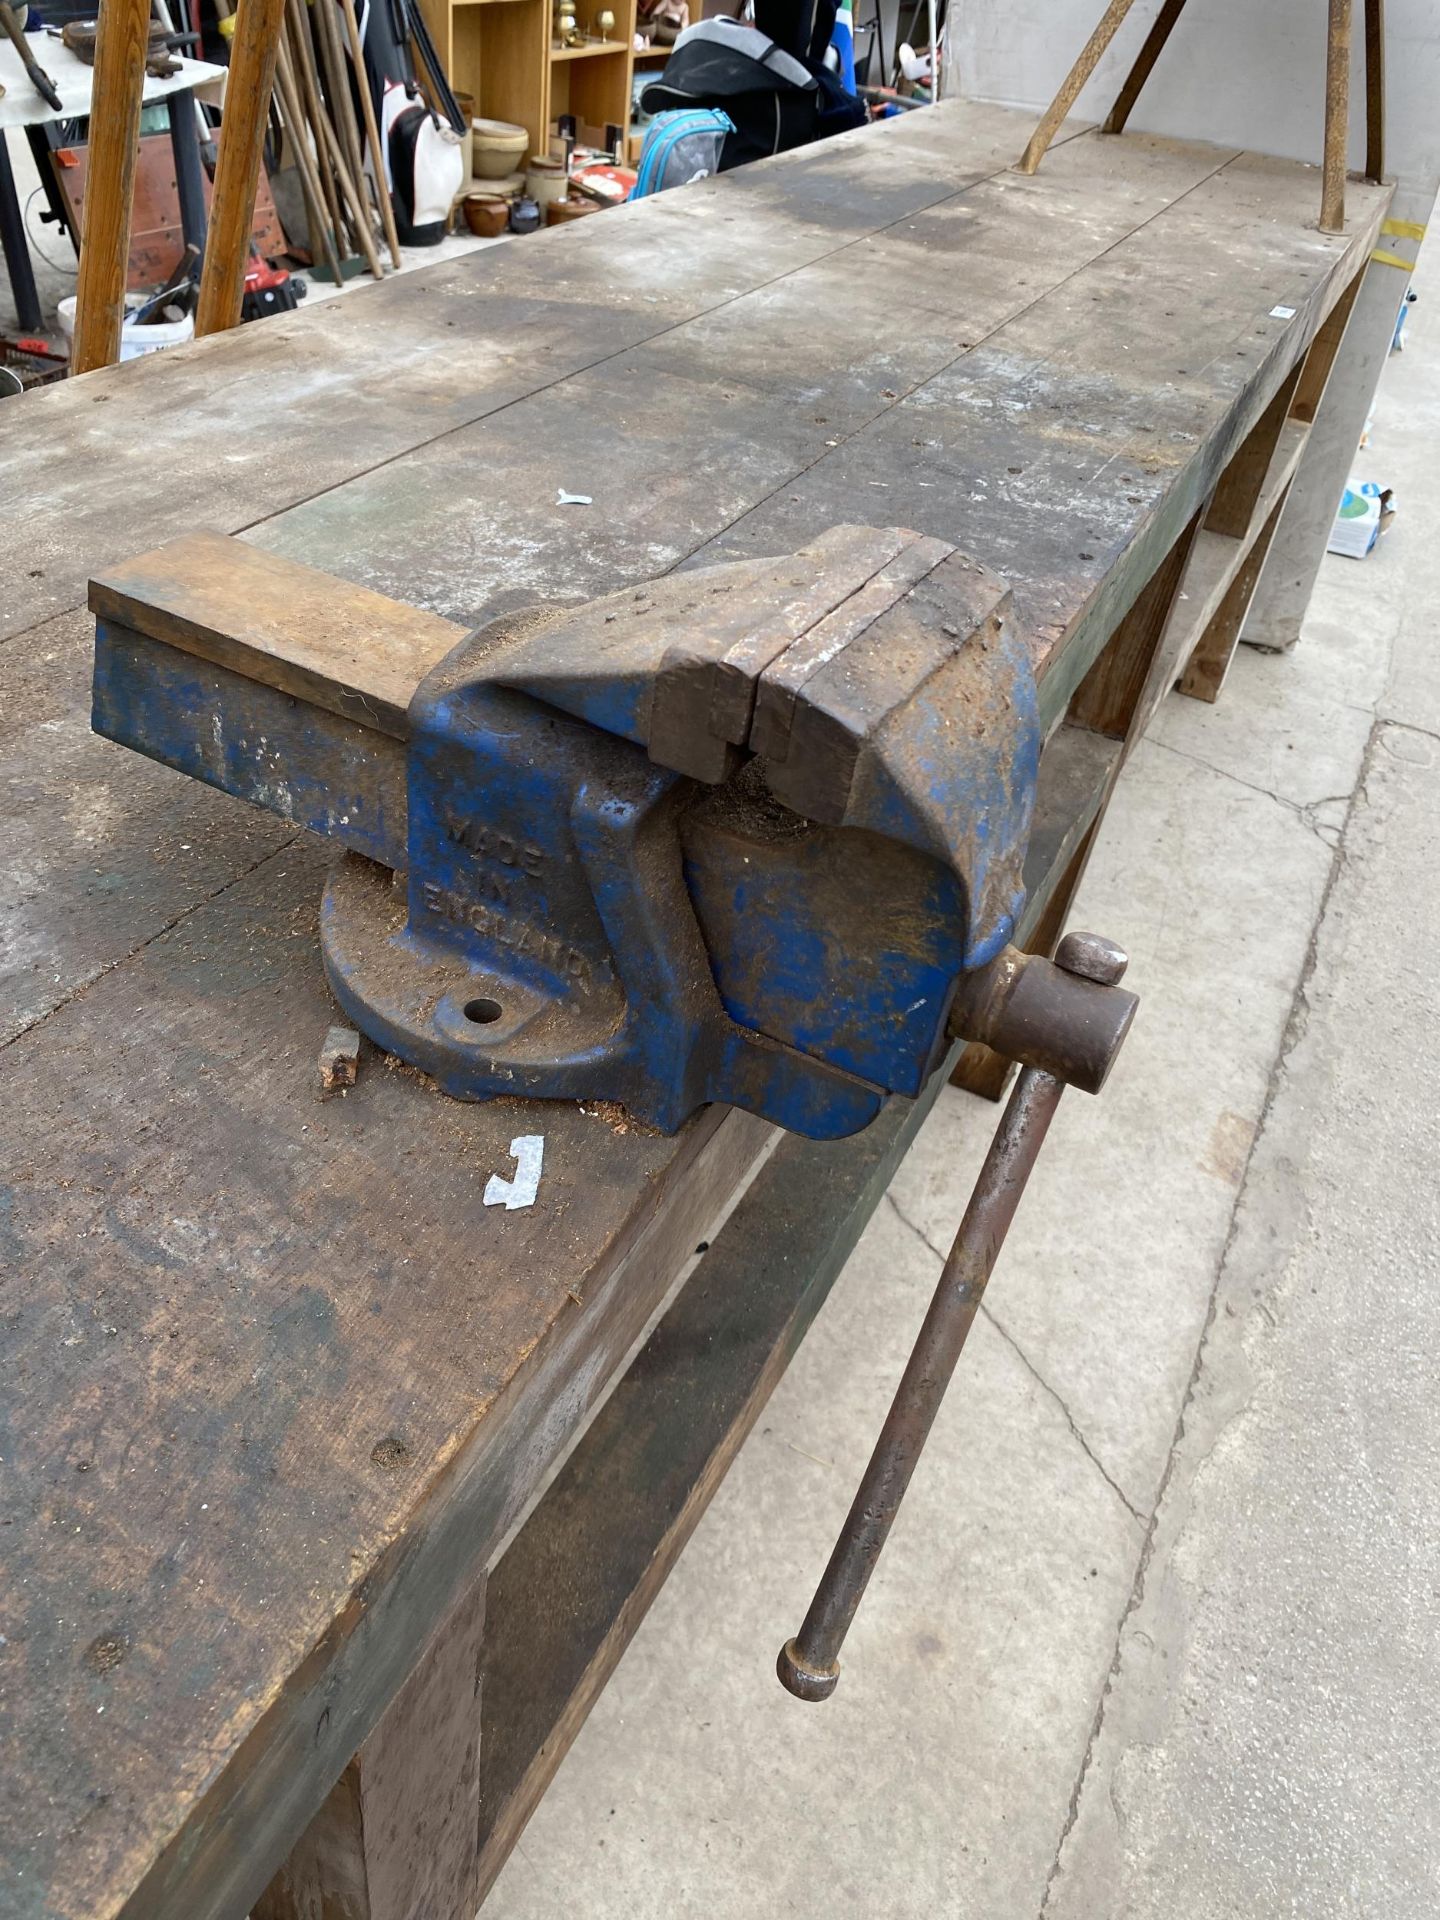 A VERY LARGE WOODEN WORK BENCH WITH RECORD NO.5 BENCH VICE ATTATCHED (L:410CM) - Bild 3 aus 5